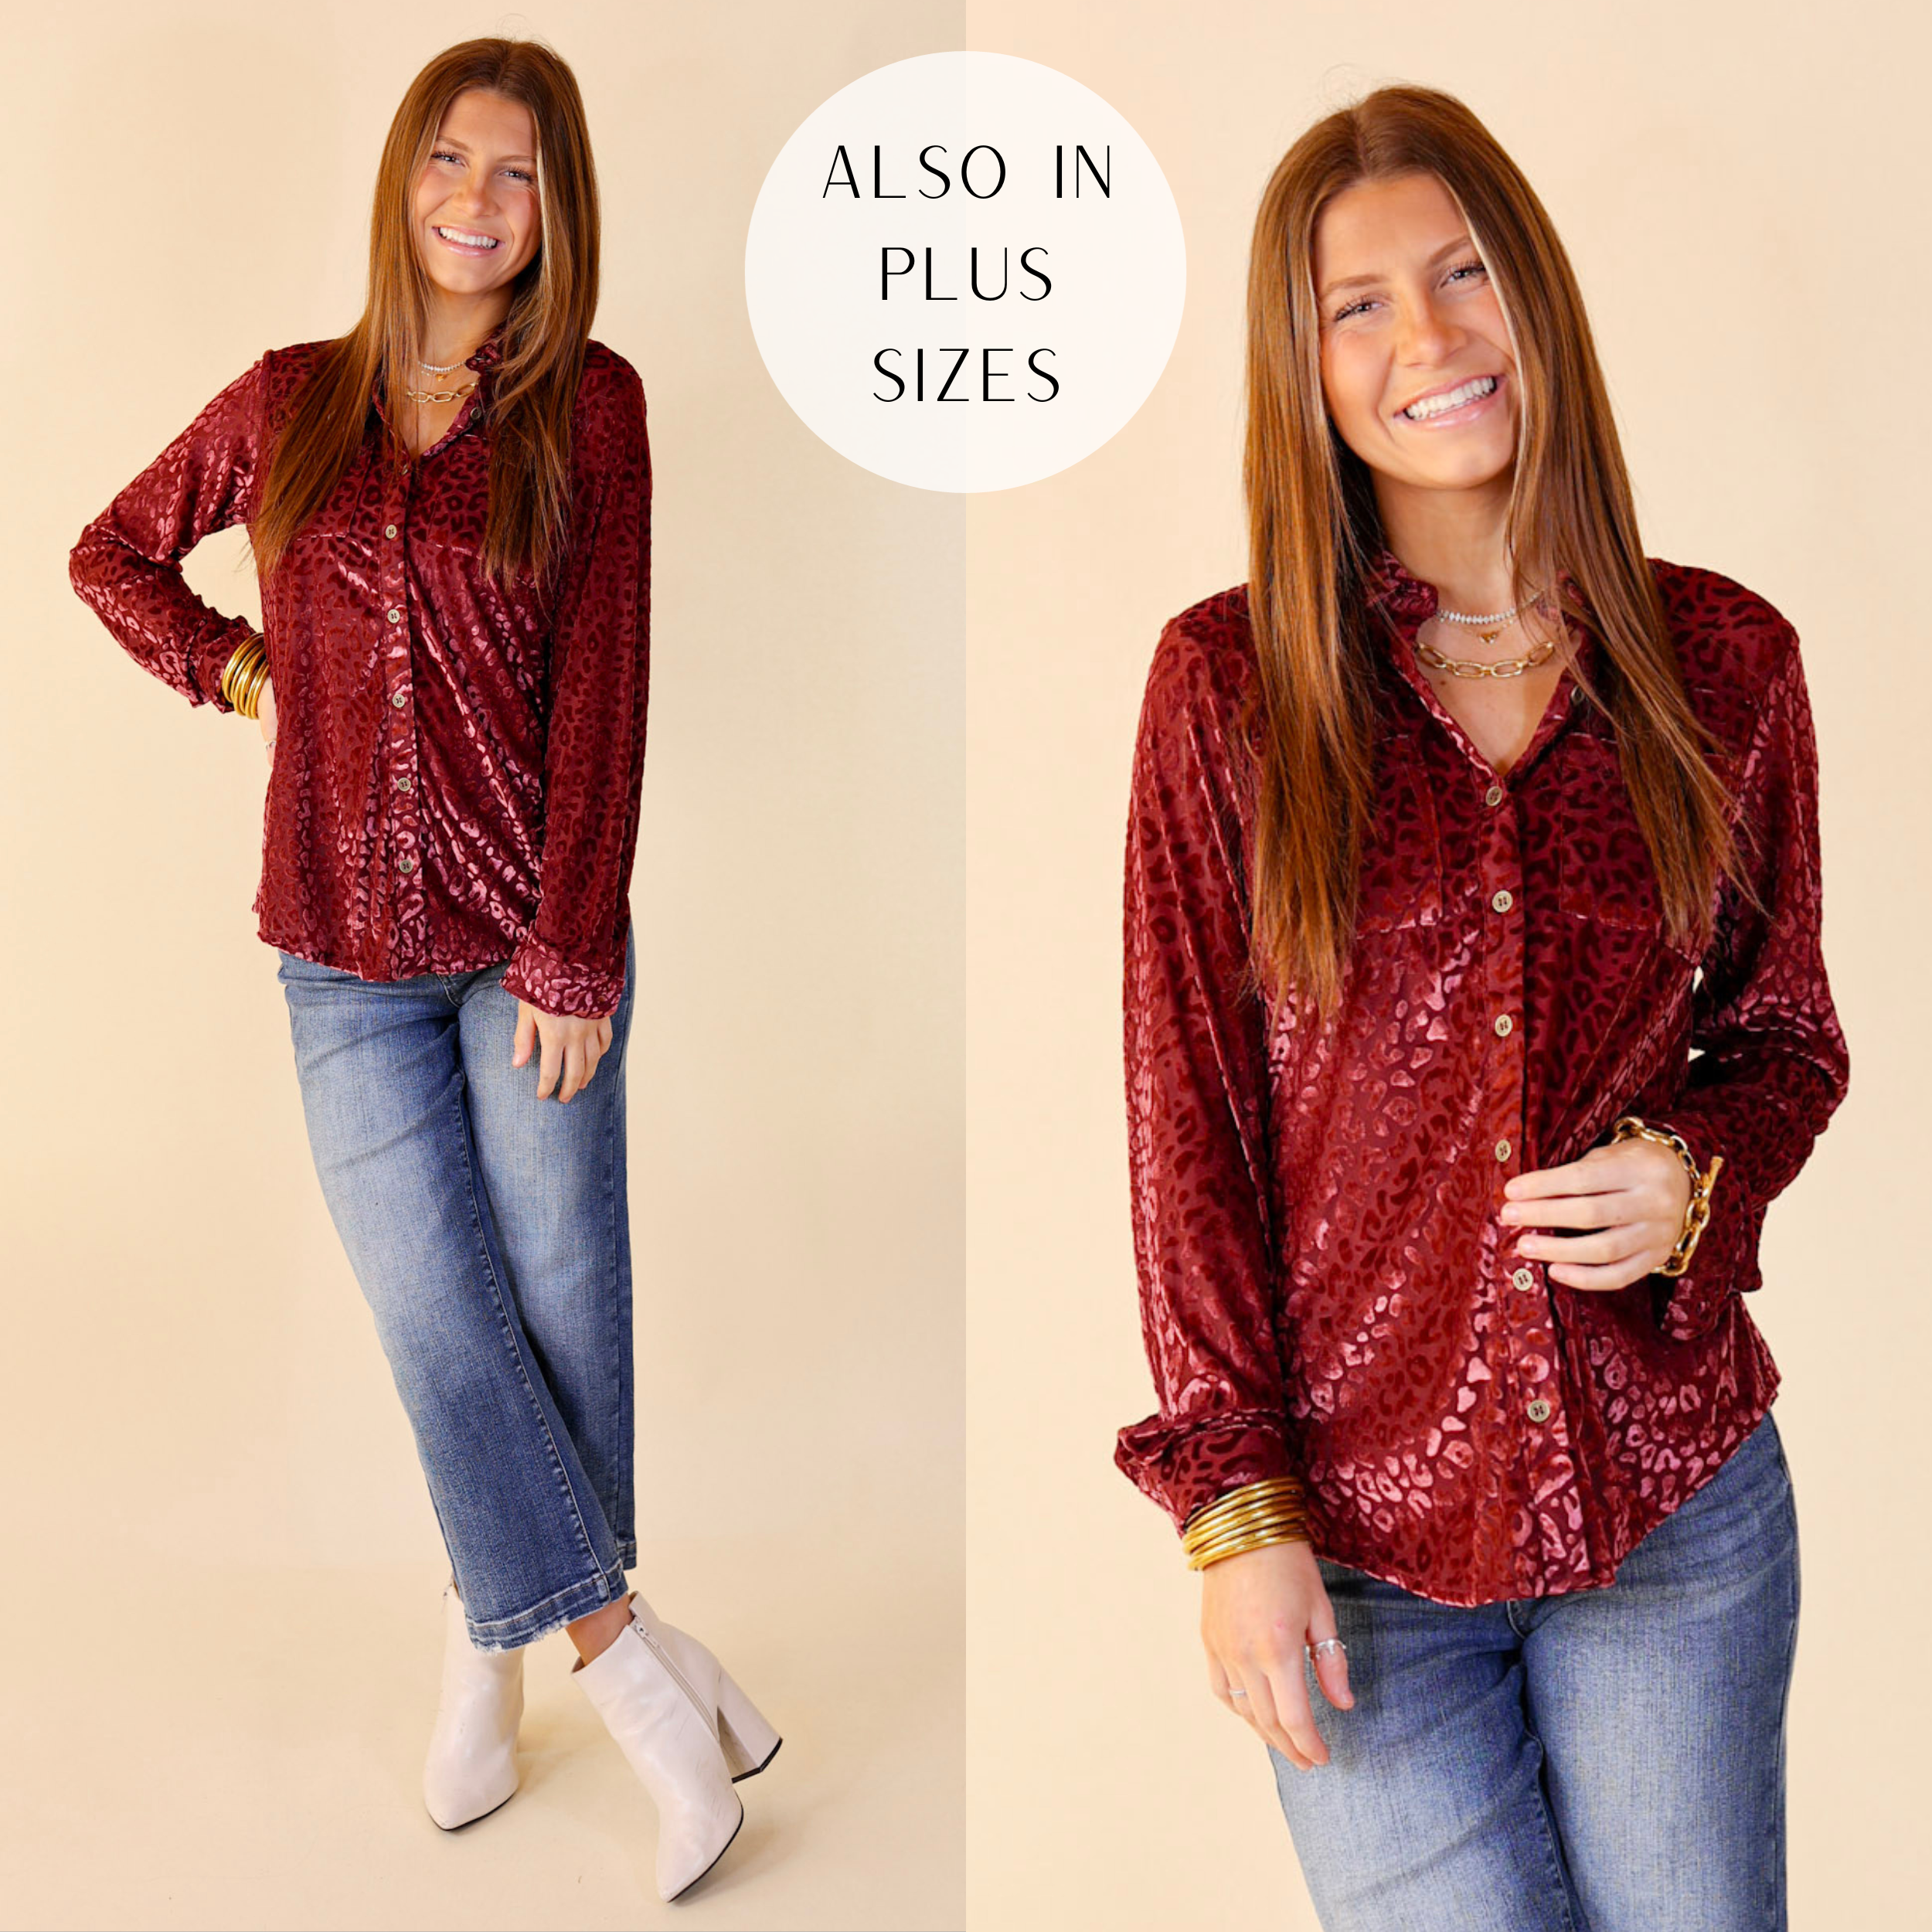 Model is wearing velvet animal print top with light washed jeans, gold jewelry, and white booties. 